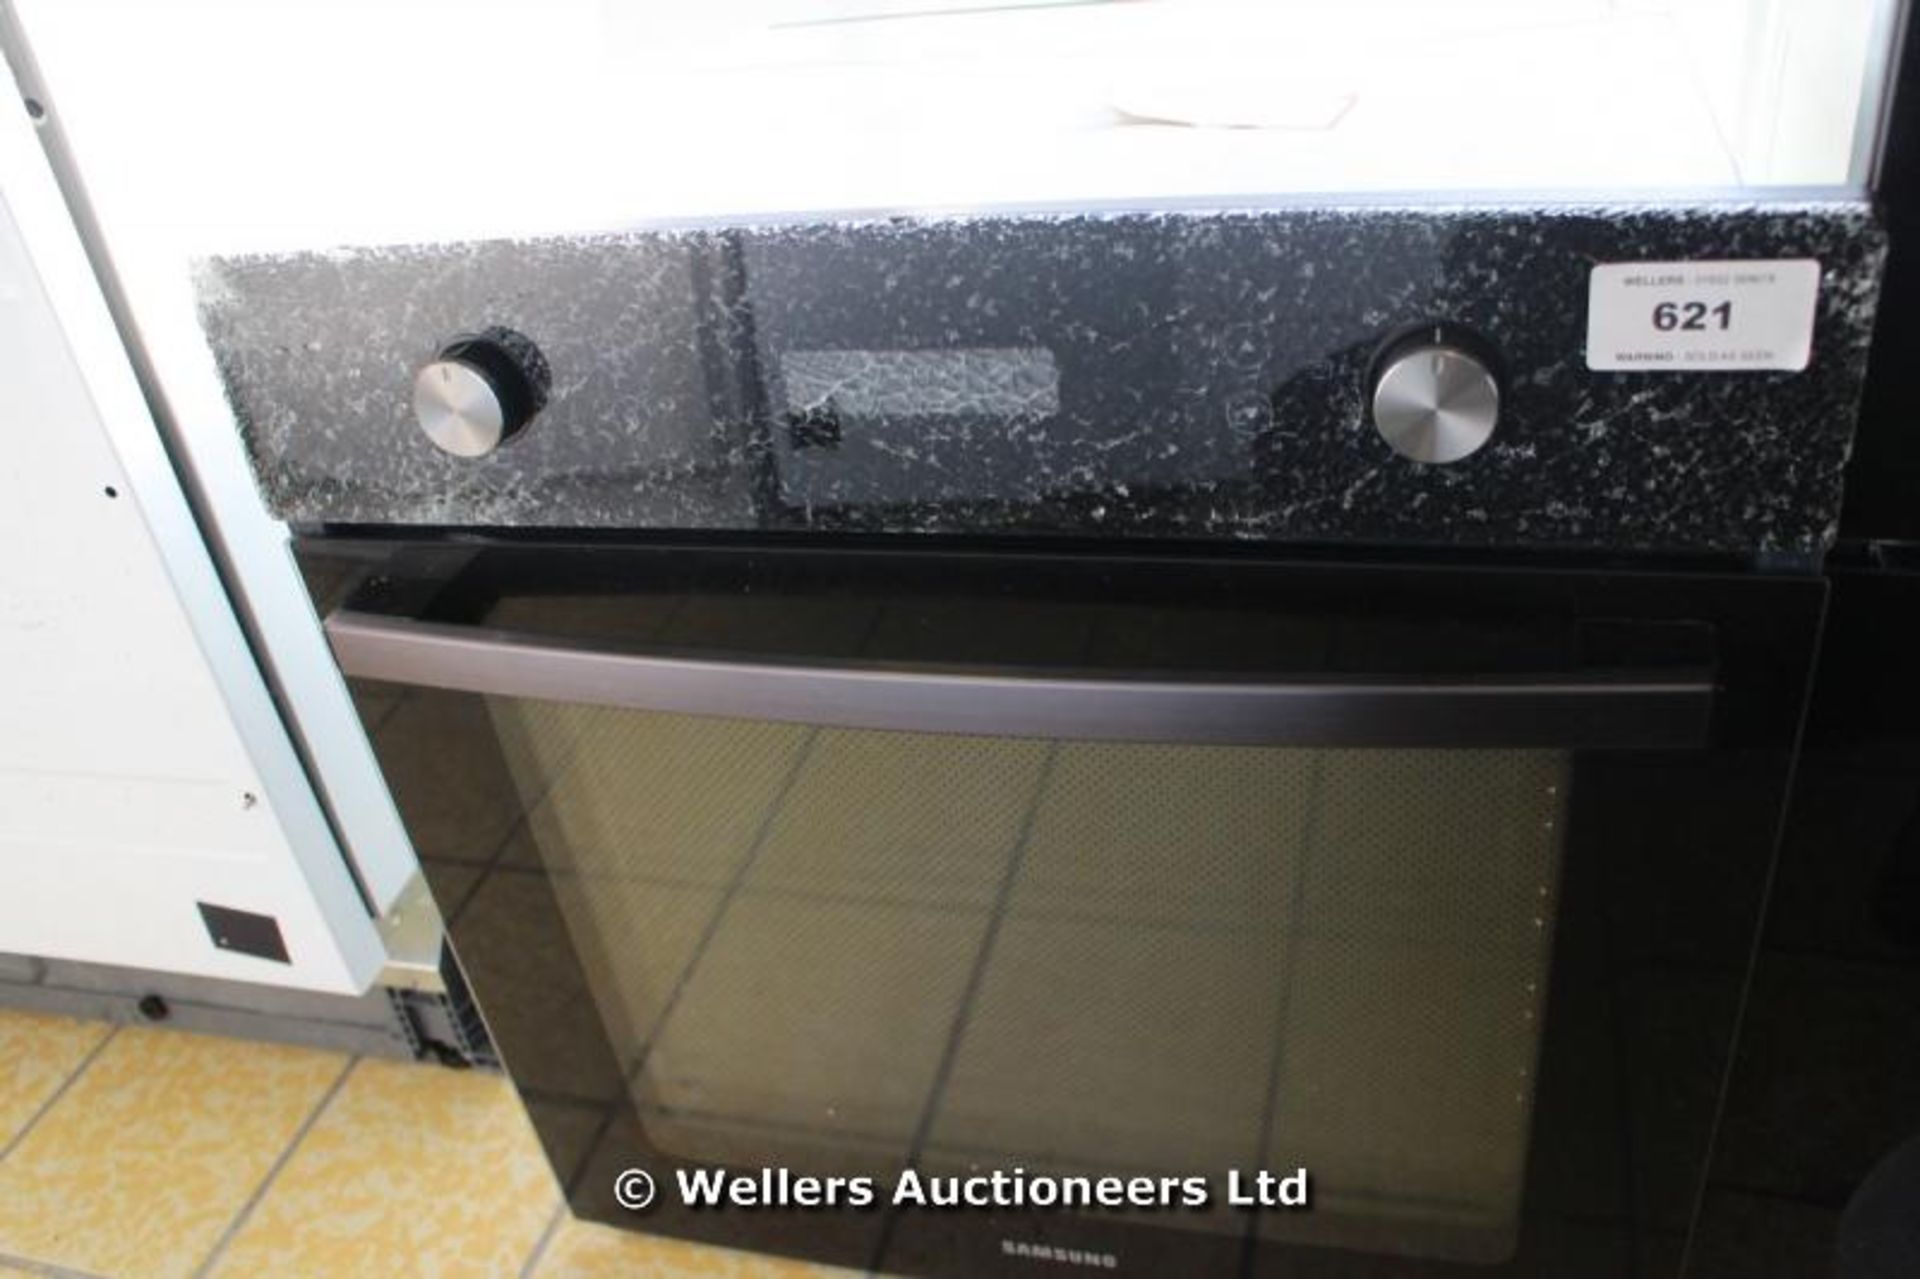 *SAMSUNG BF1N6G123 BLACK GLOSS ELECTRIC OVEN THE PIECE OF GLASS WHERE THE DIALS ARE IS SMASHED AND - Image 2 of 3